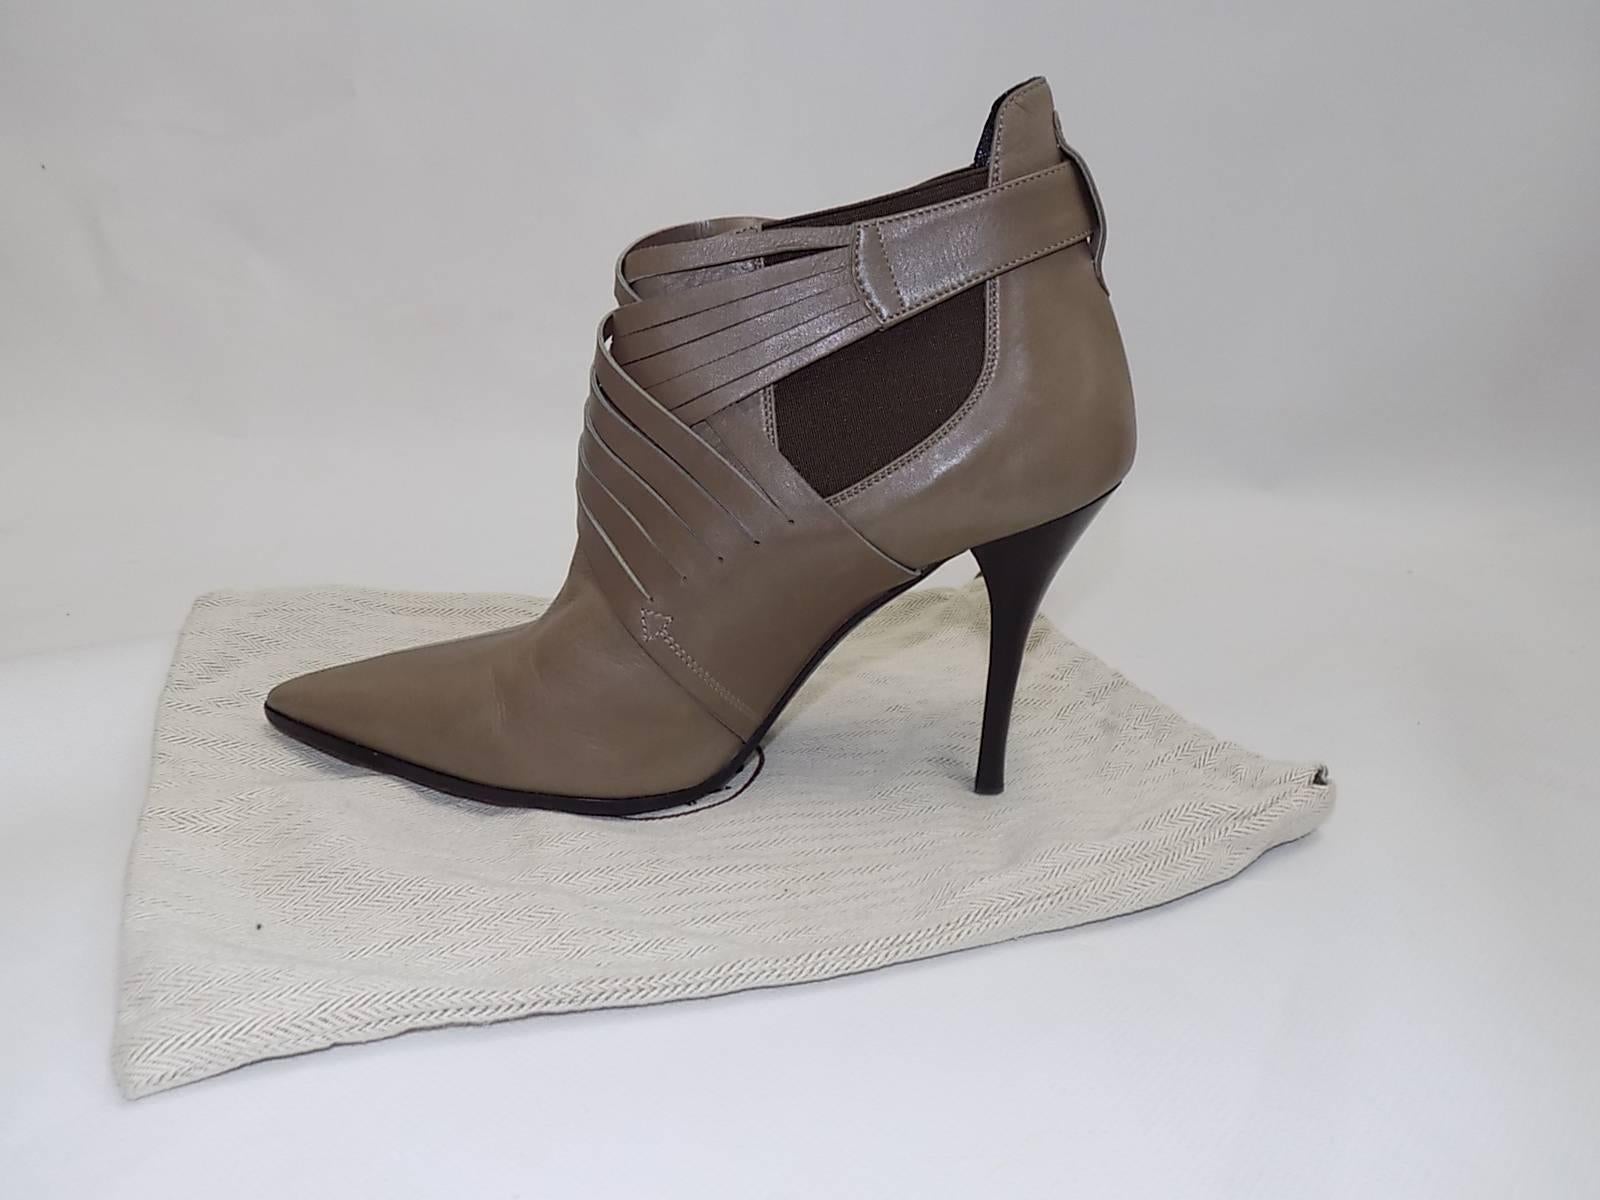 Gray Hermes Pointy toe ankle boots/ booties sz  37